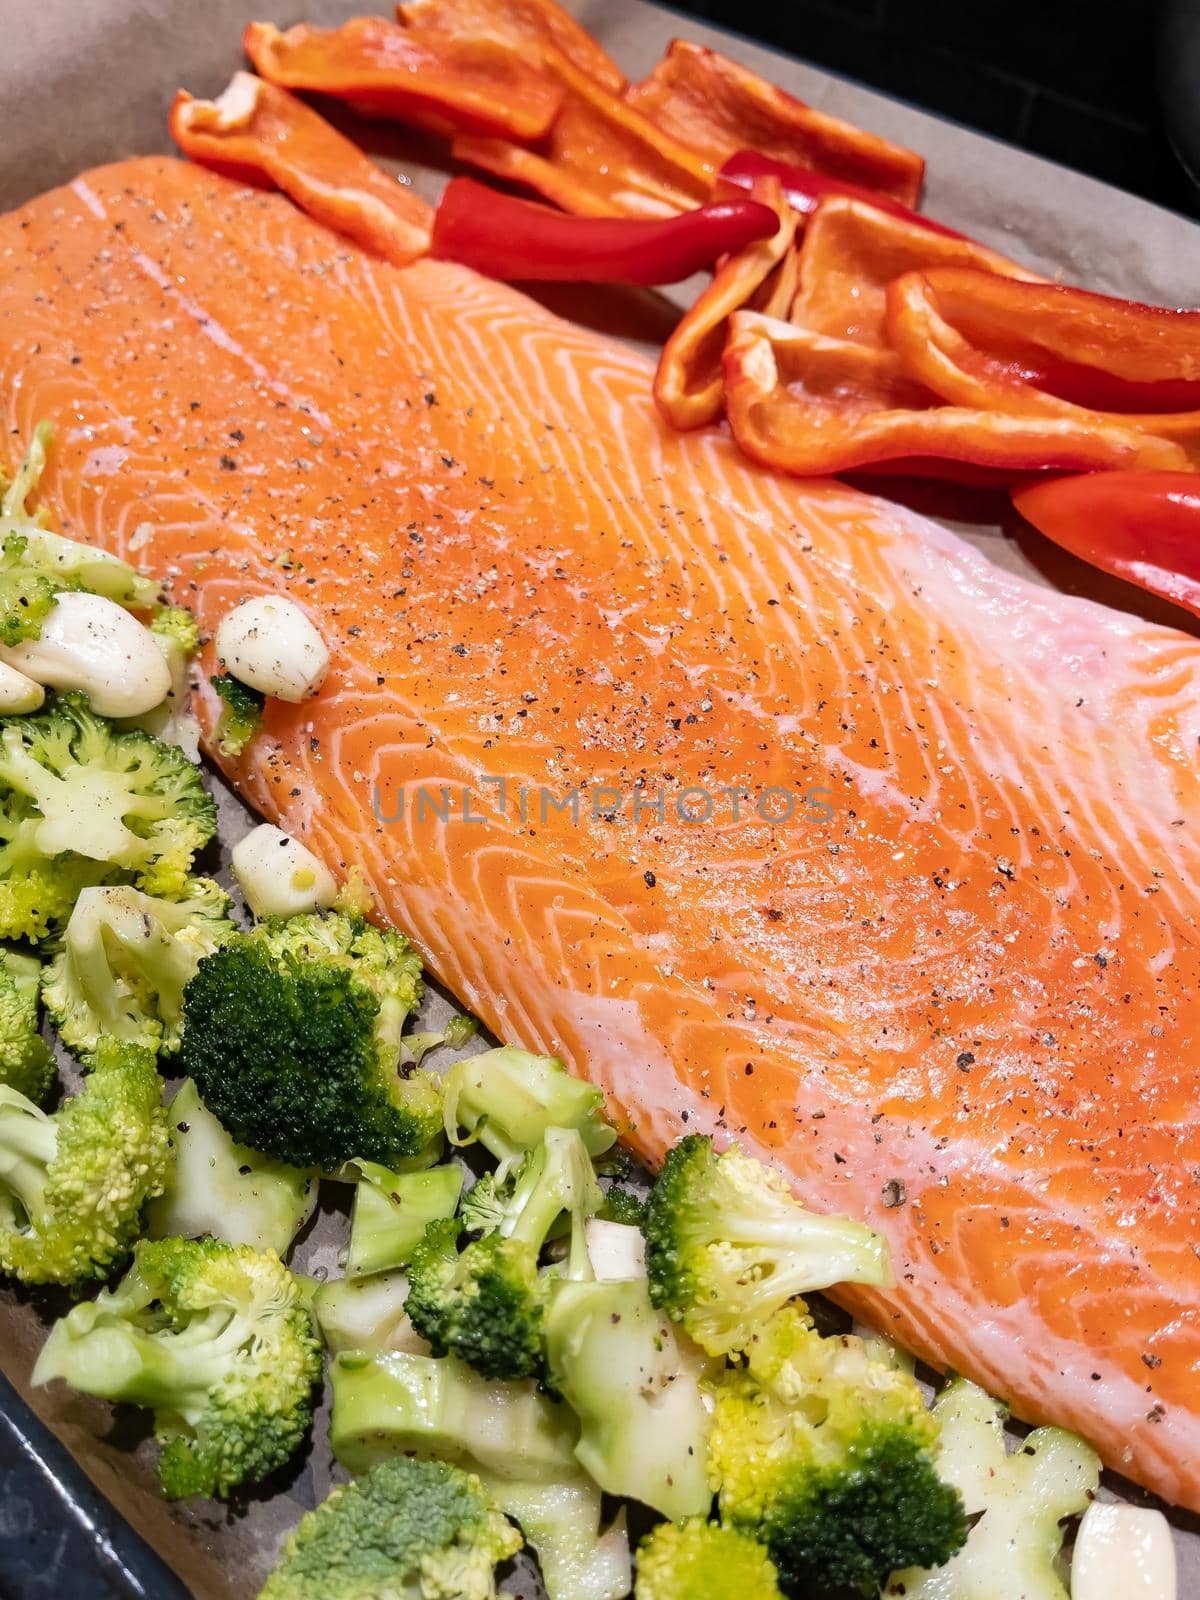 A large piece of red fish fillet lies on the prostena, vegetables ready to be locked, broccoli, red sweet pepper. High quality photo